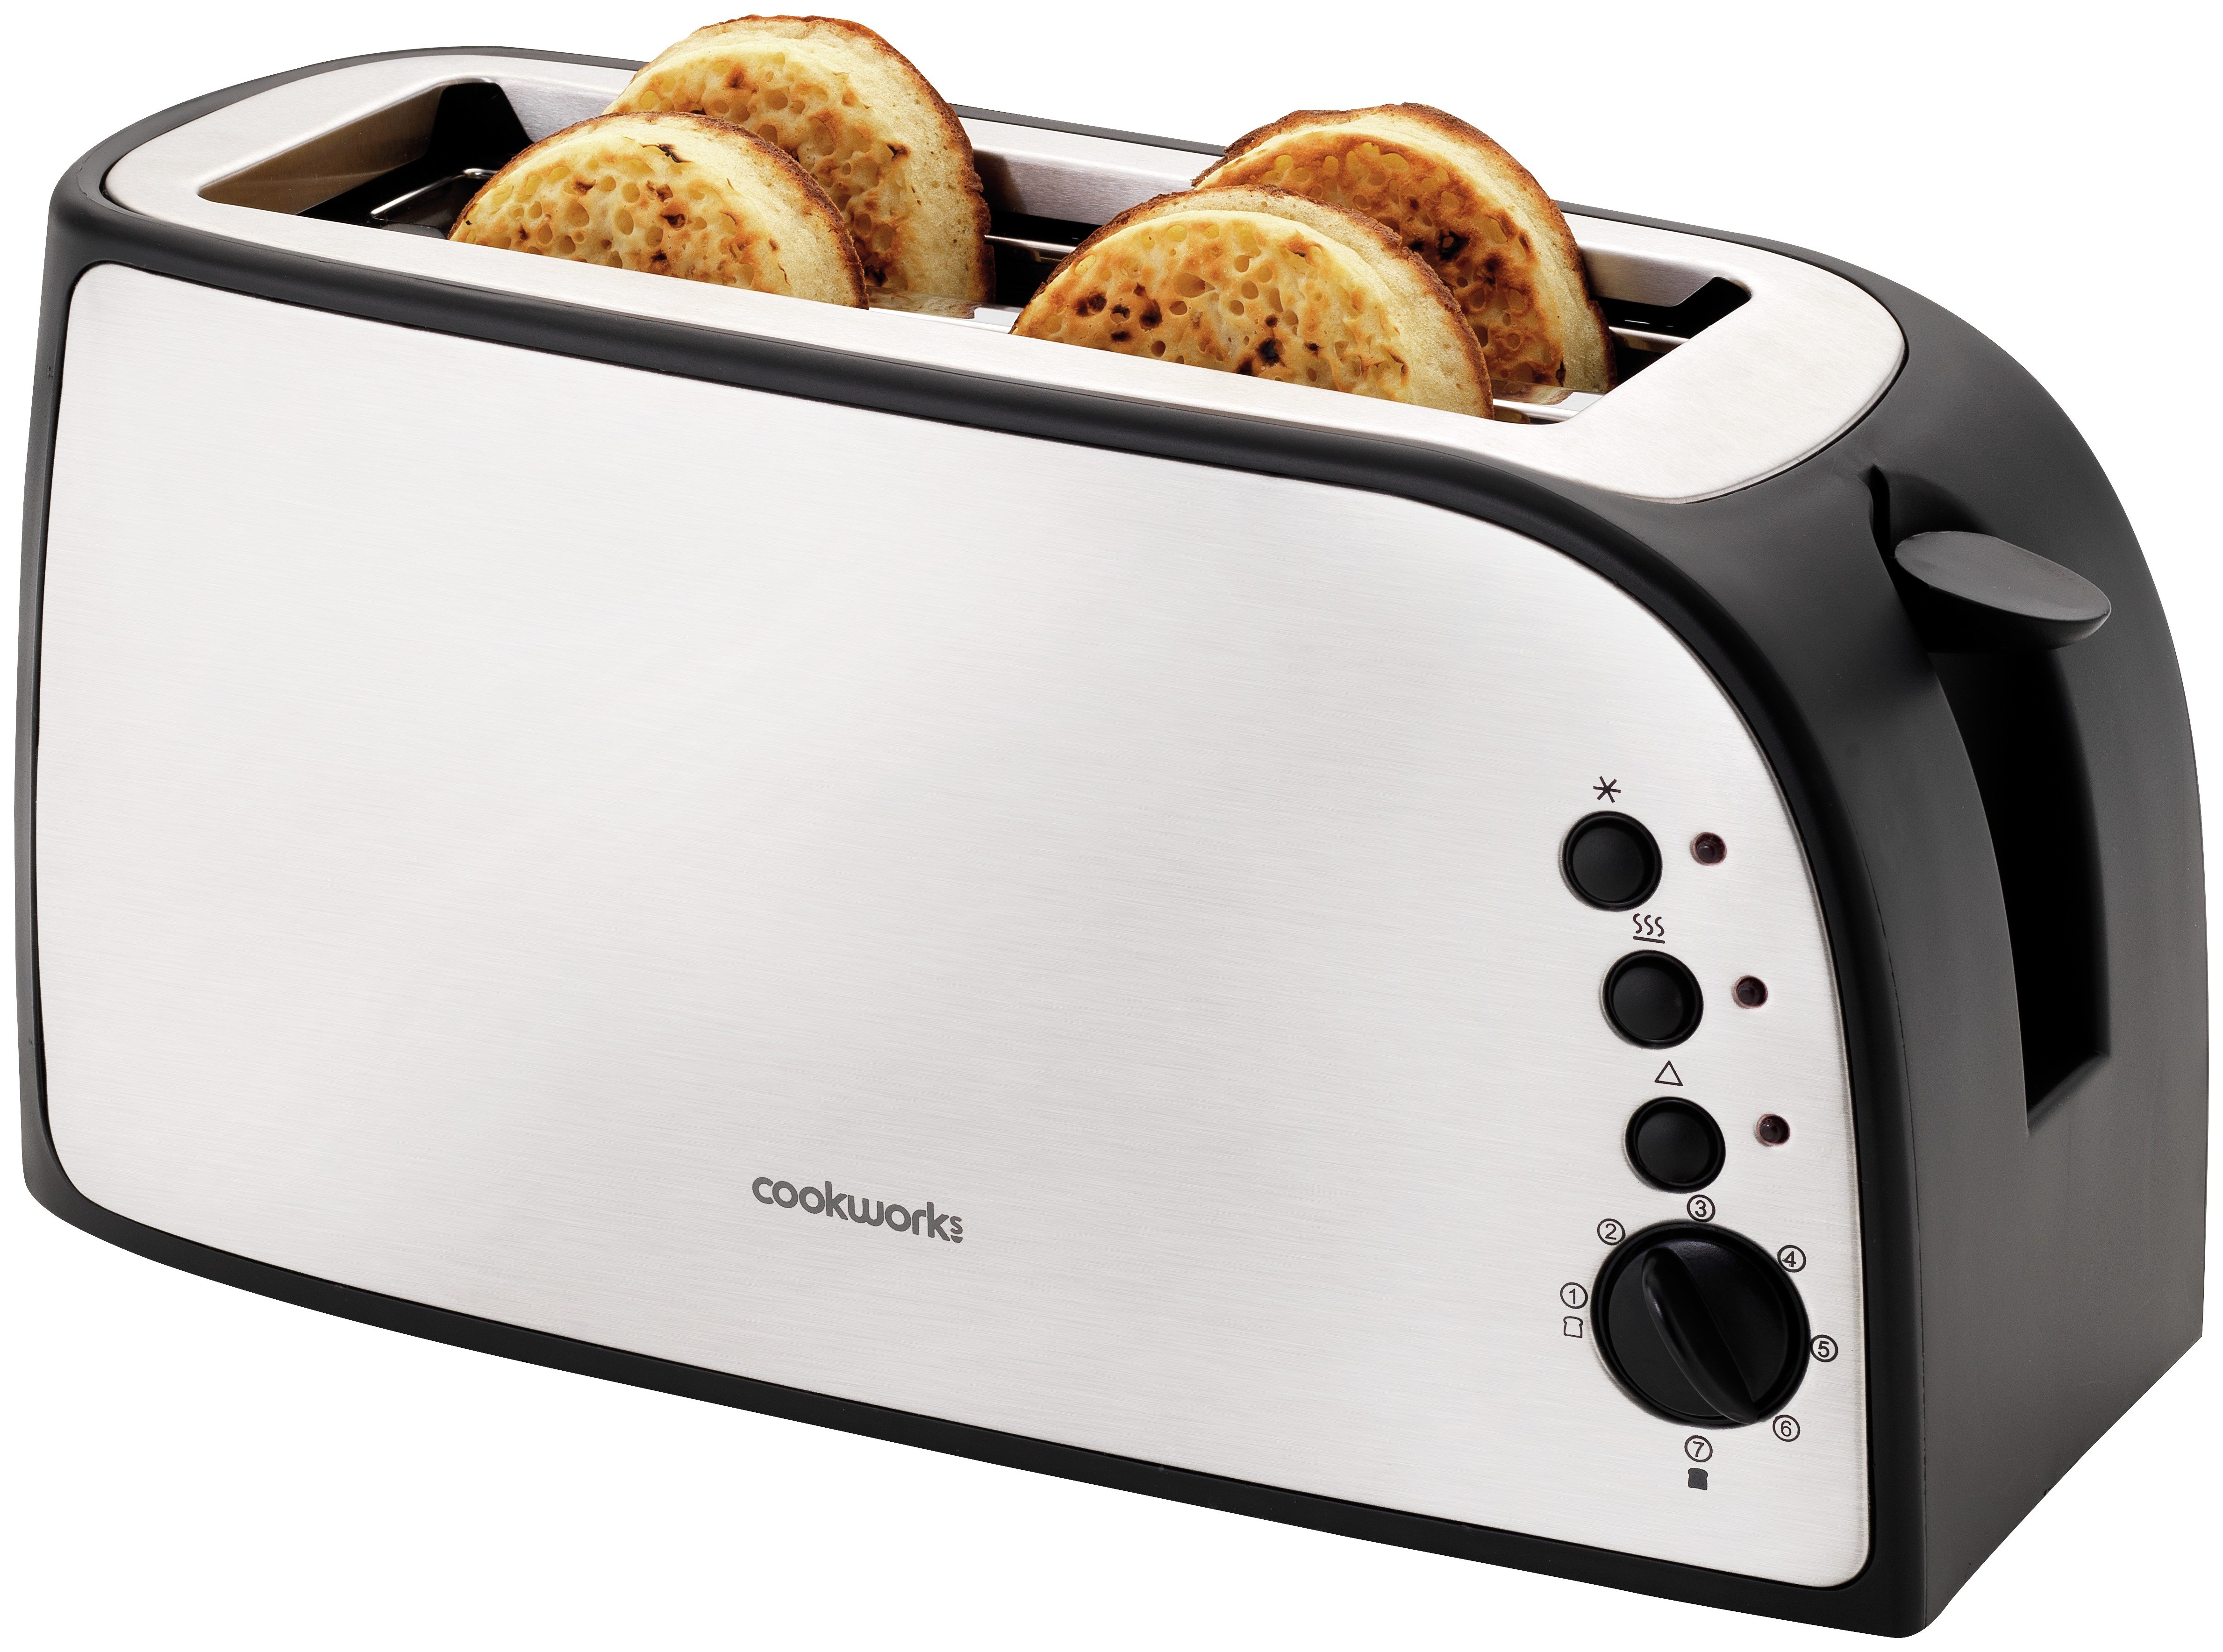 cookworks-4-slice-toaster-1500-watts-reviews